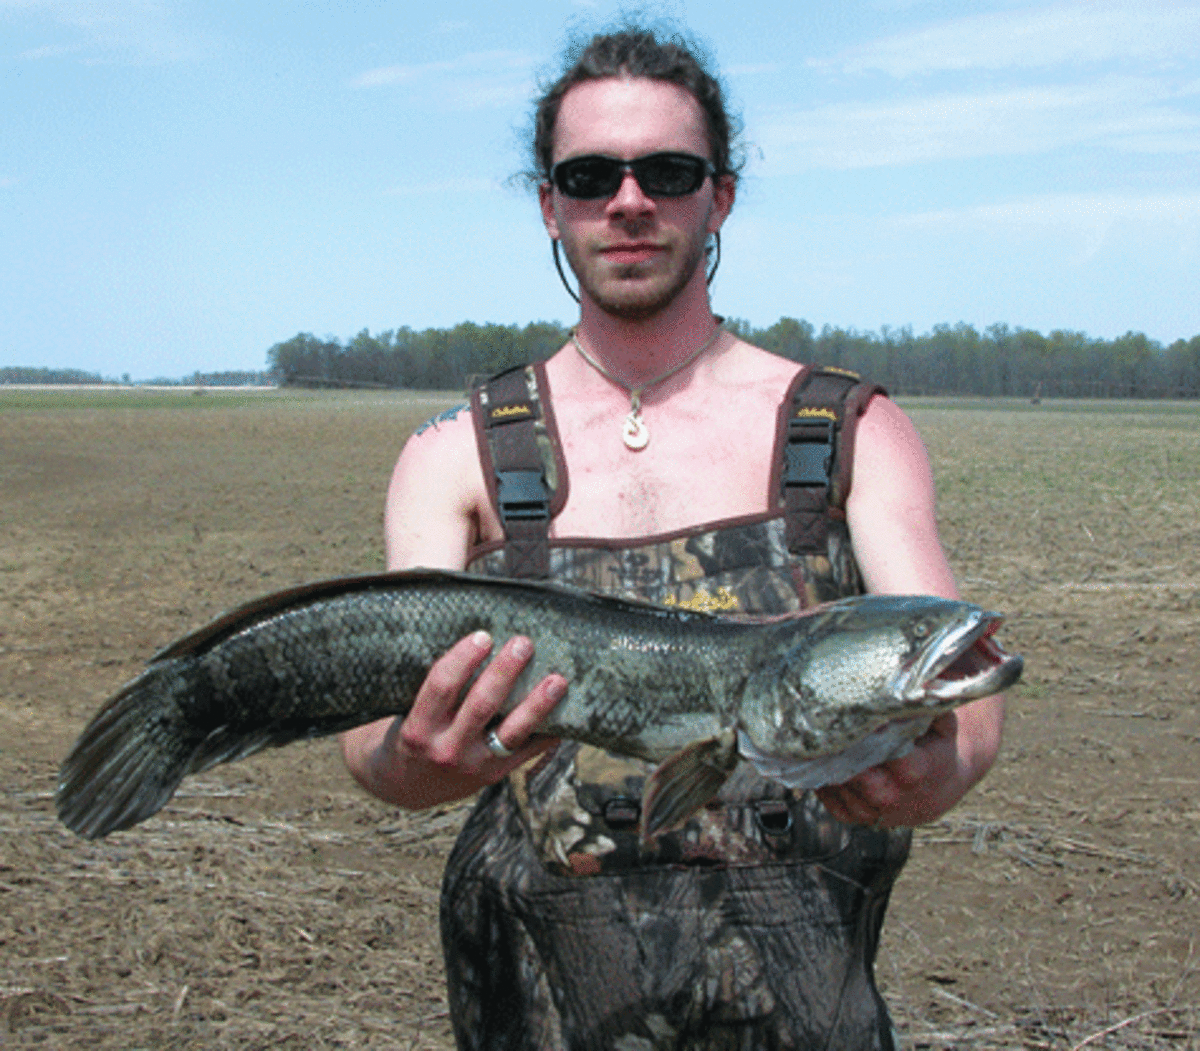 Arkansas launched Operation Mongoose in an effort to eliminate snakeheads. (Courtesy of University of Central Arkansas)